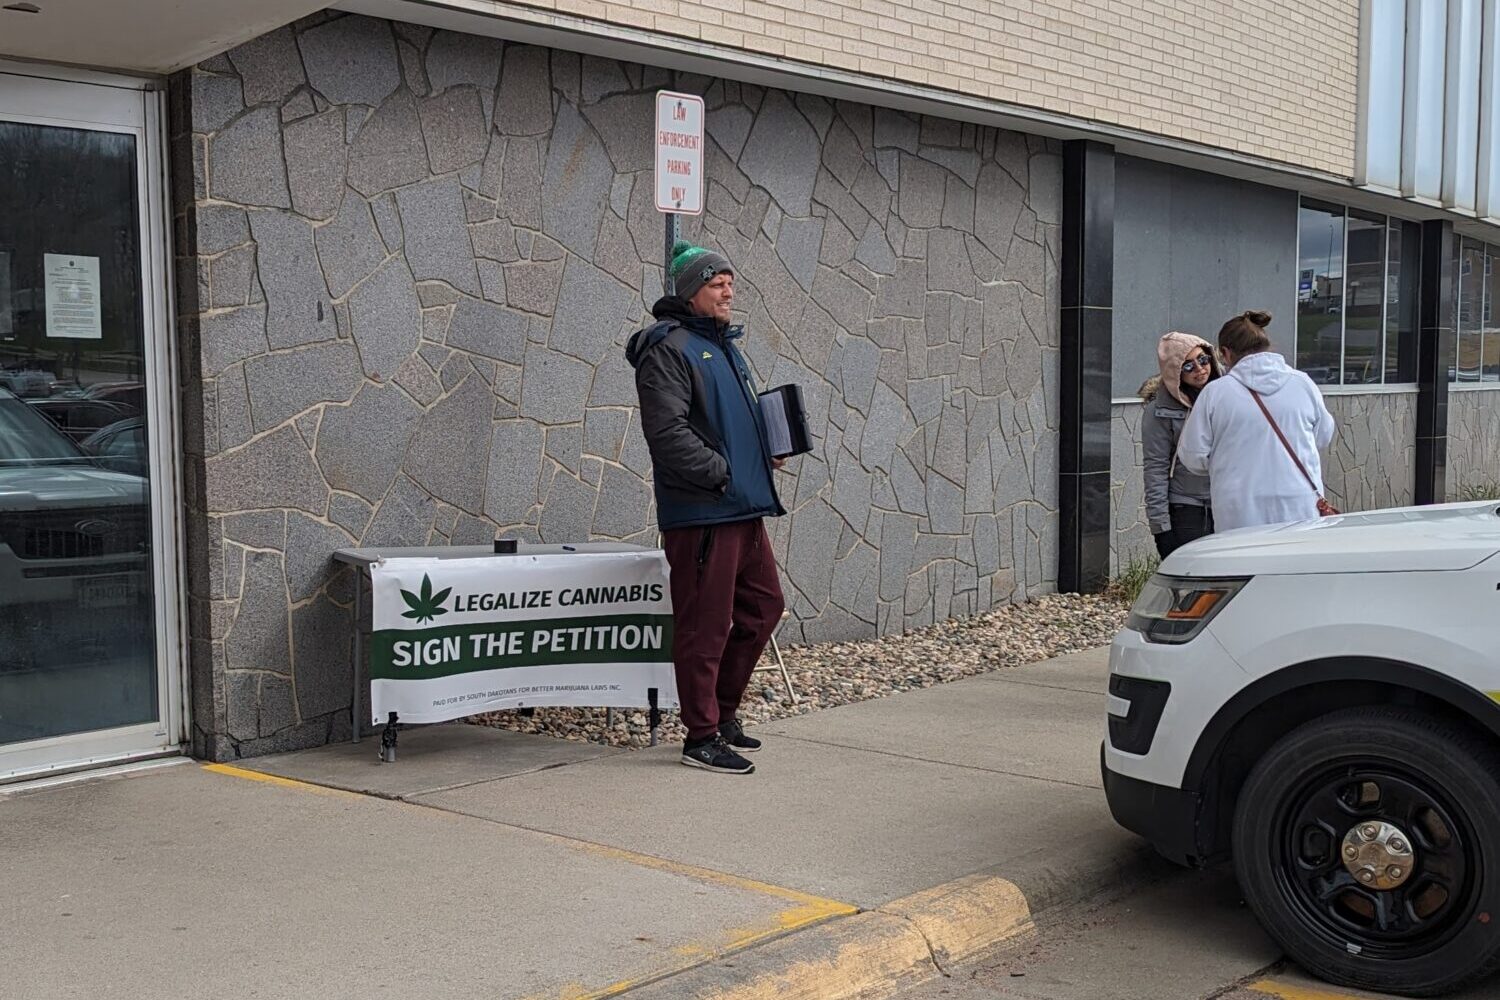 Cannabis advocates hope 420 ‘holiday’ pushes petition drive to success • South Dakota Searchlight